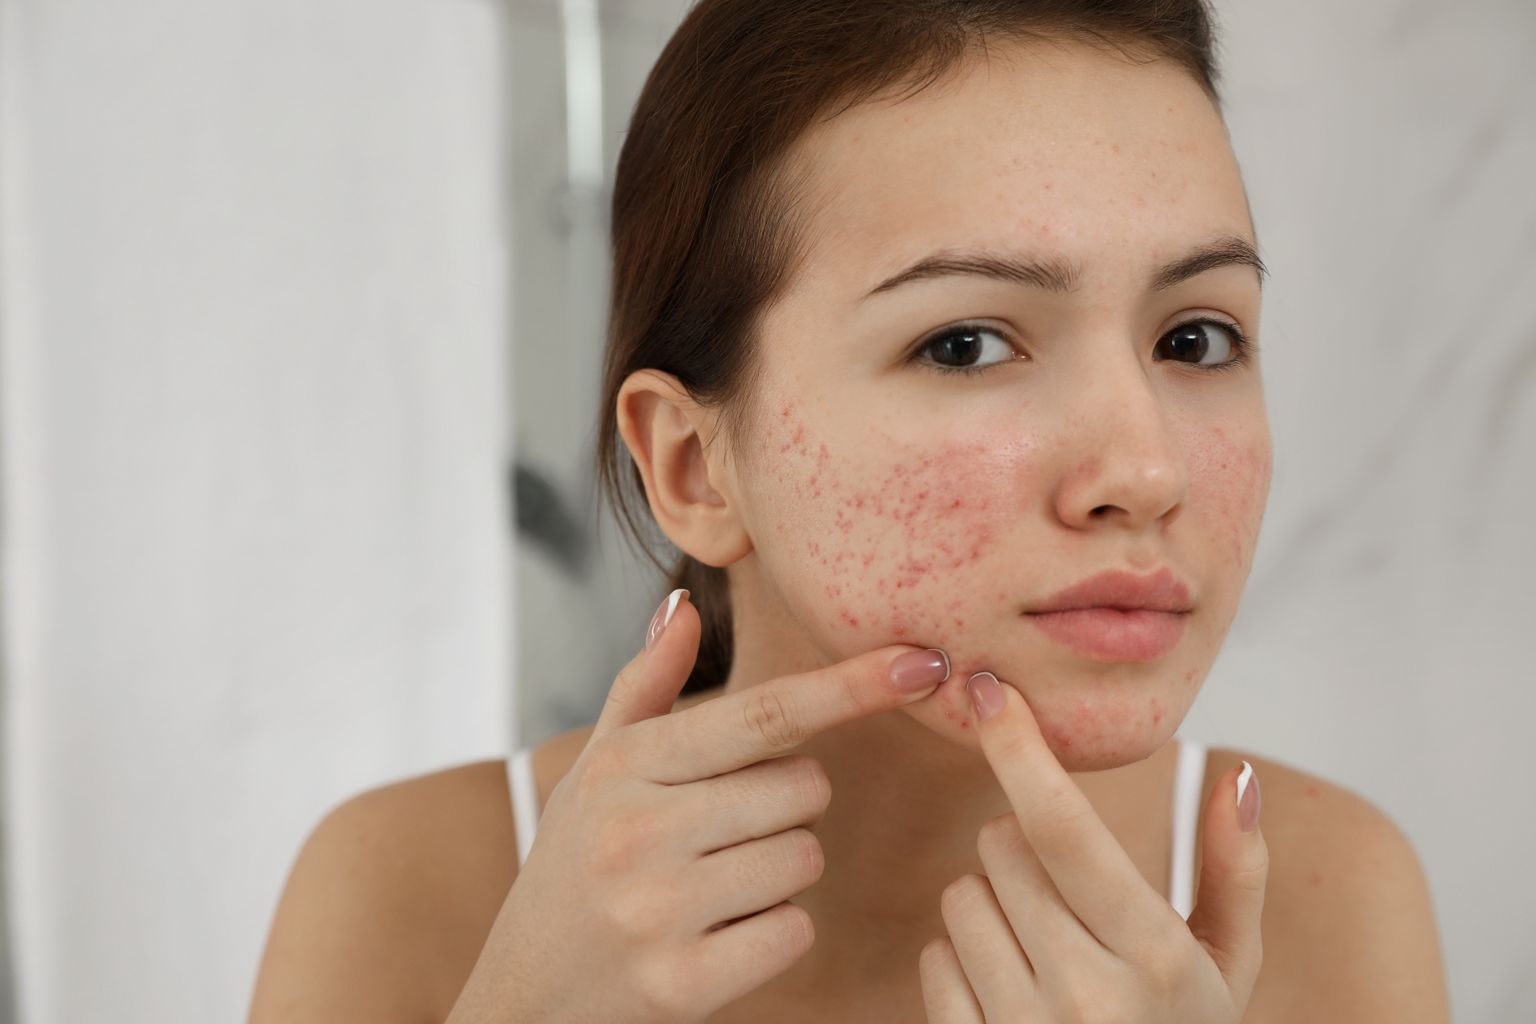 Teen girl with acne problem squeezing pimple indoors 